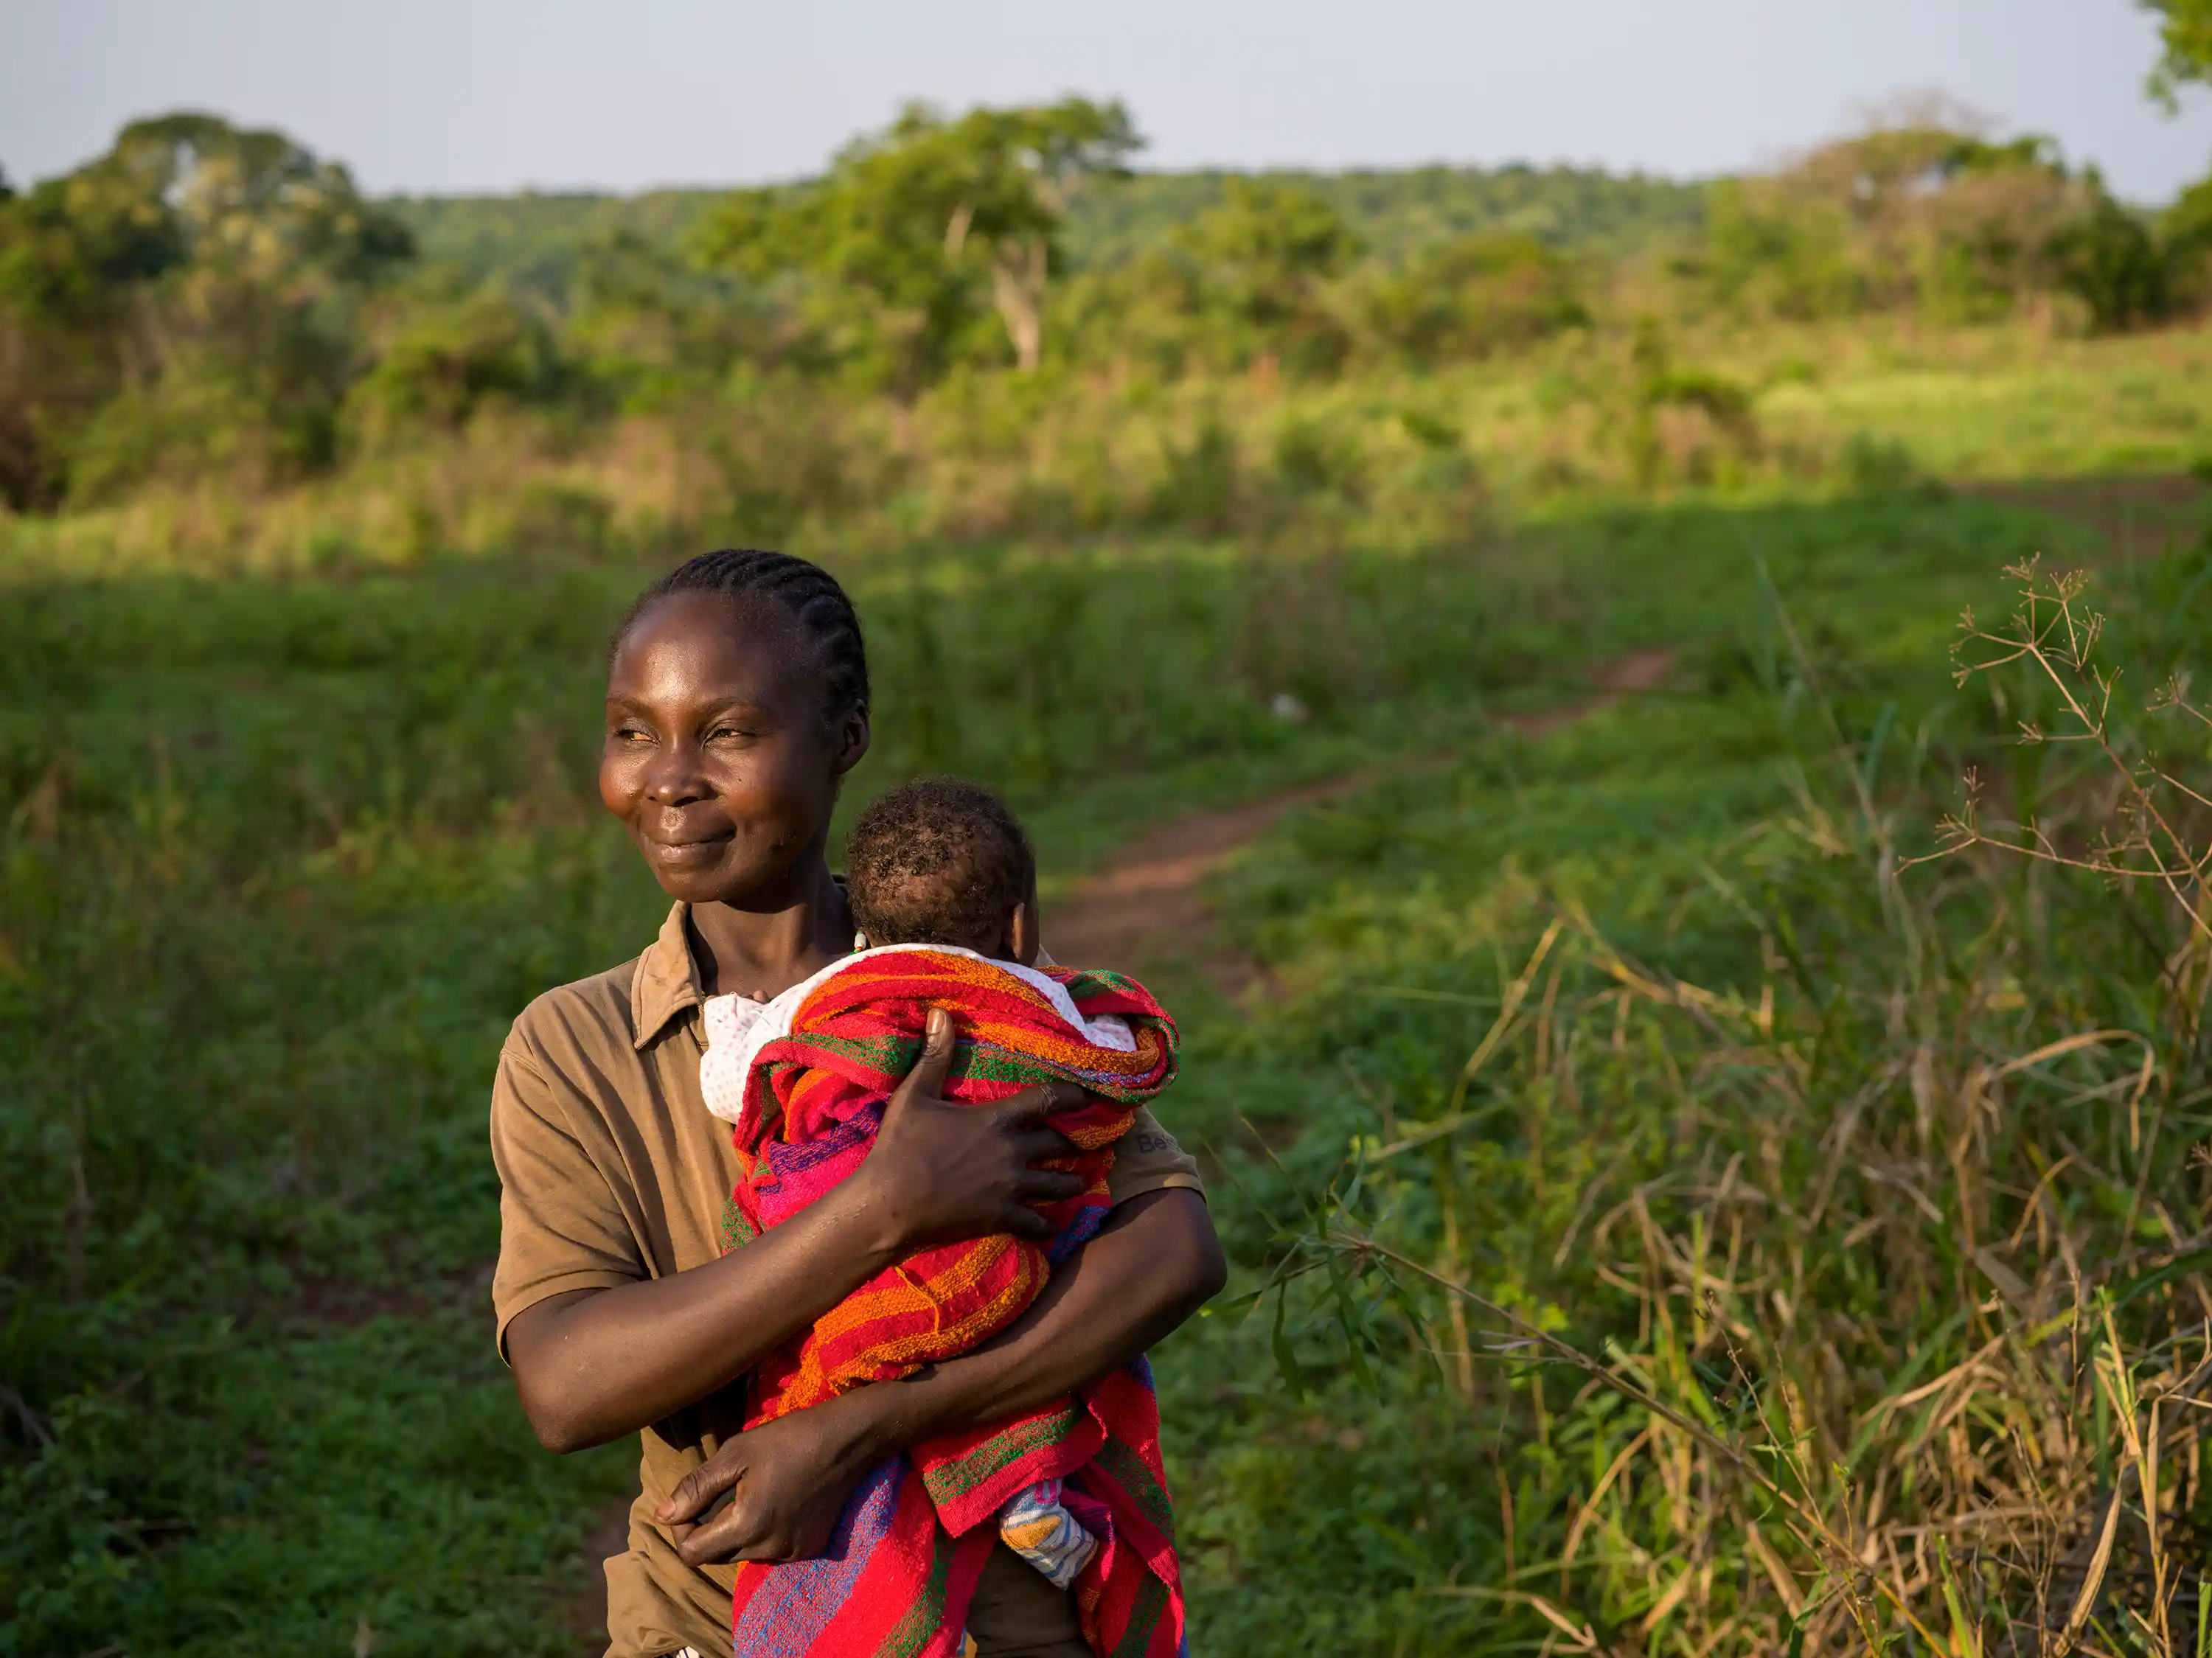 Natalie Wato (33) with her five-week-old son Sauvenator on the small plot of land the family tends near their home in Central African Republic.